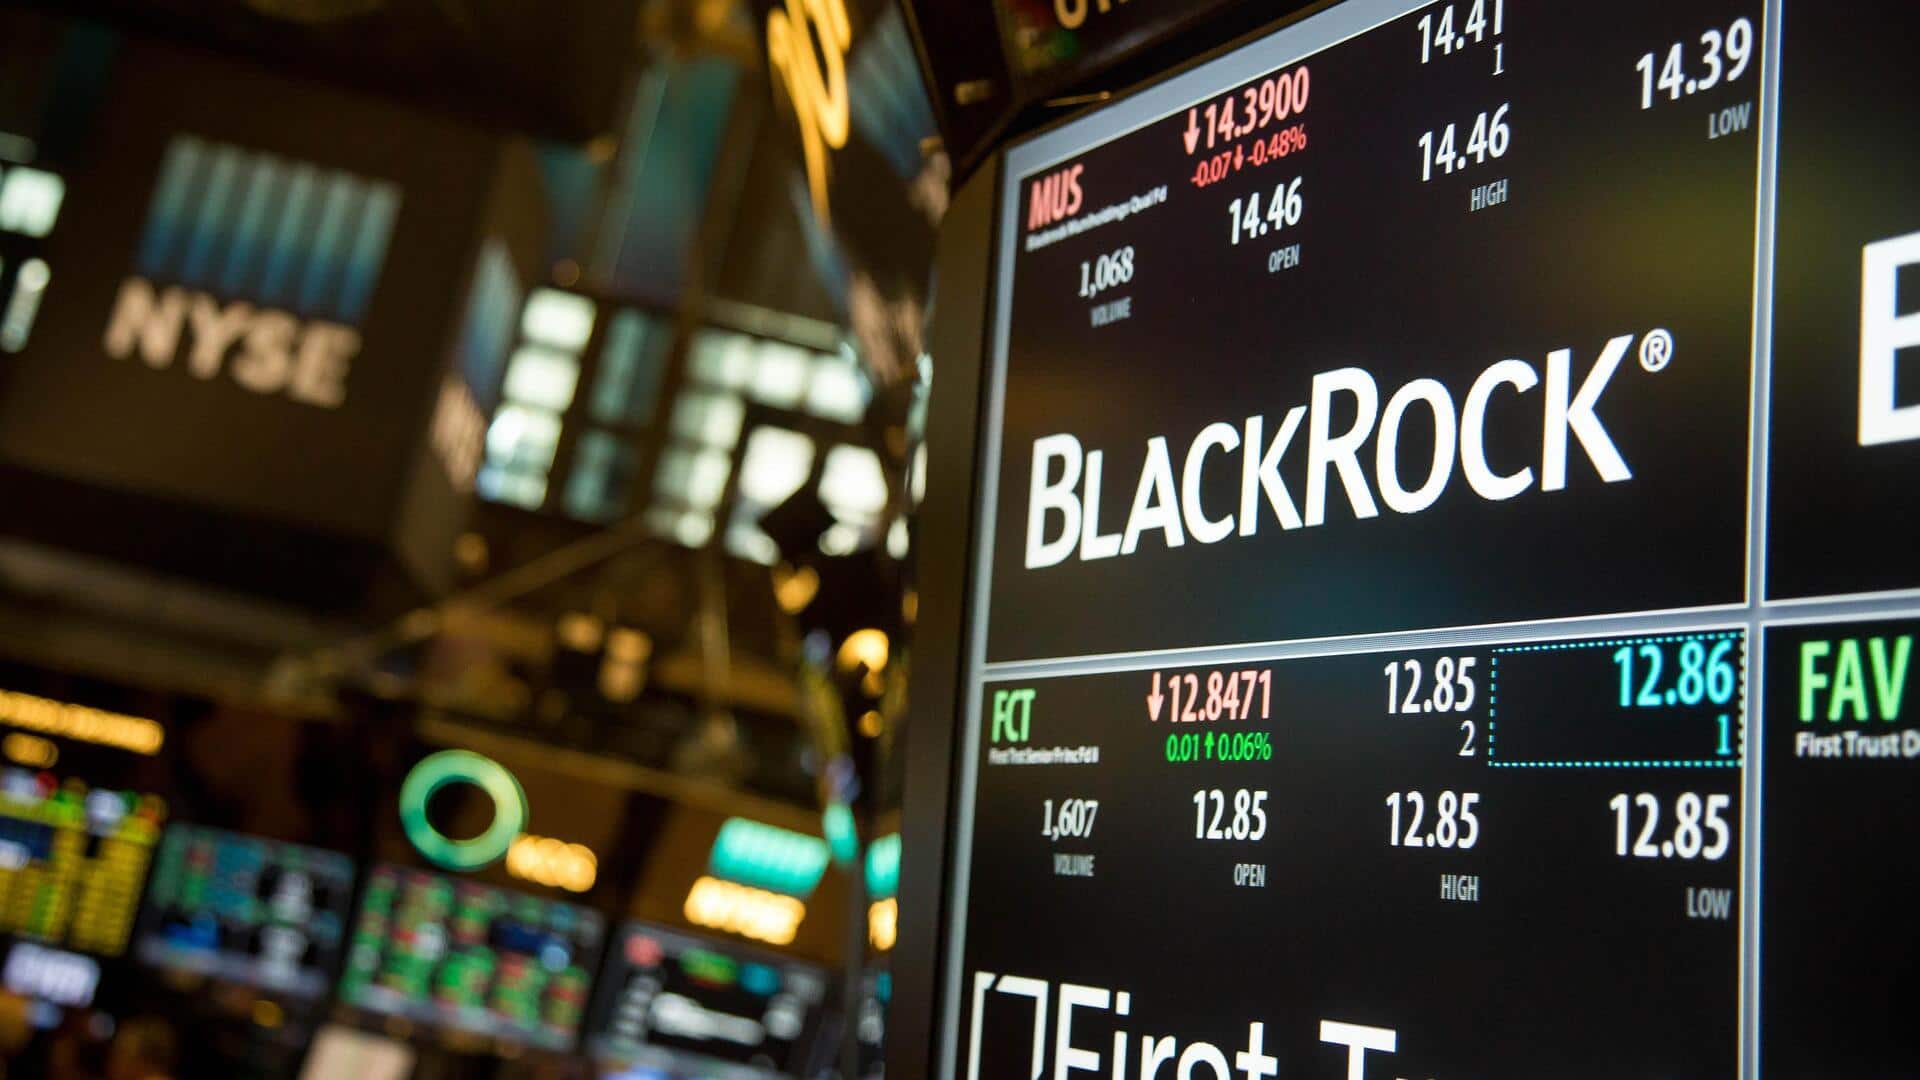 BlackRock sees $13 billion withdrawal from long-term funds: Here's why